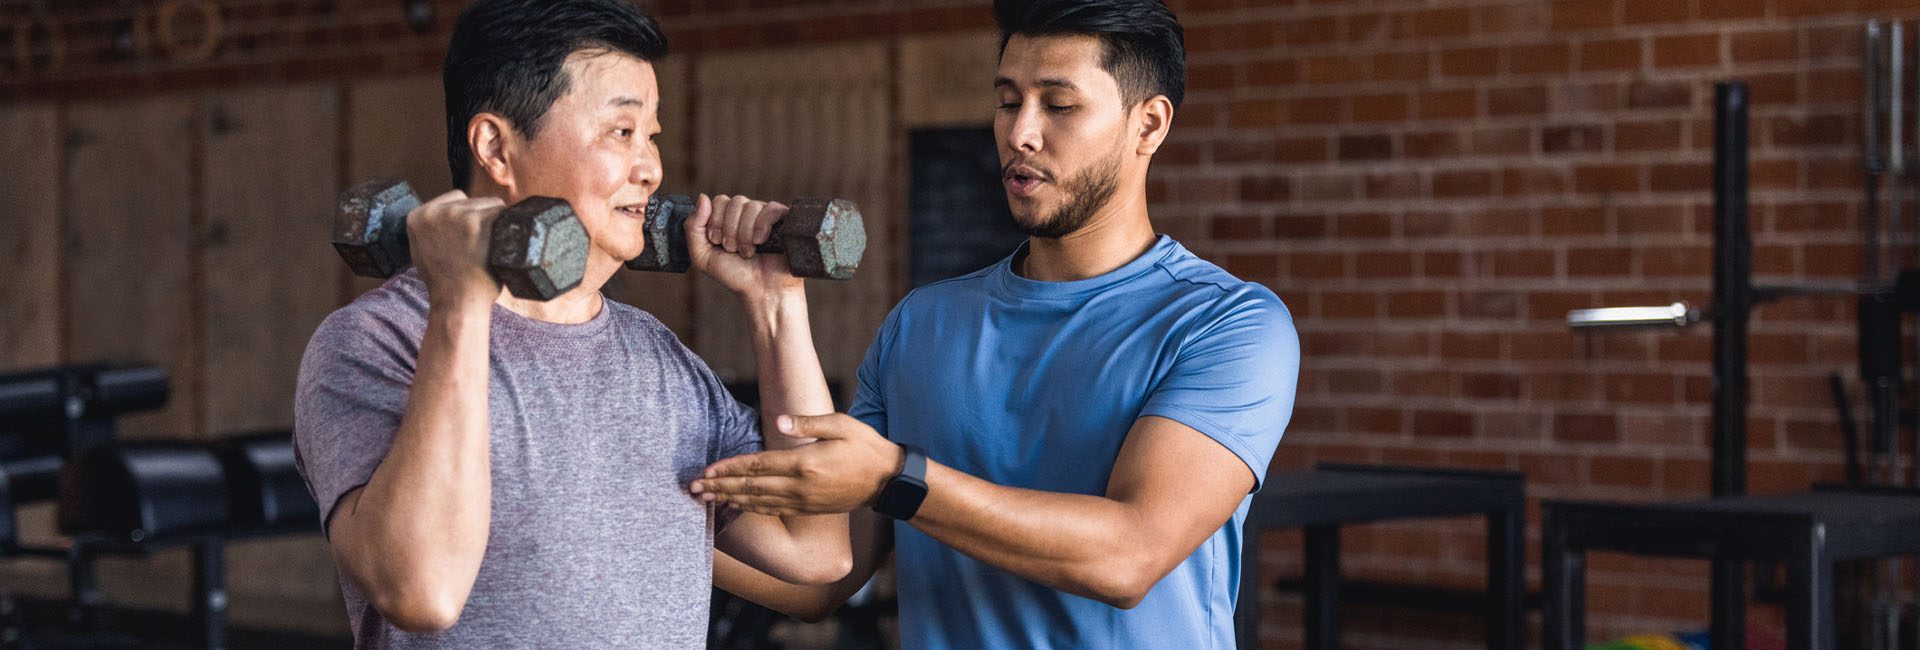 certified personal trainer working with a gym member